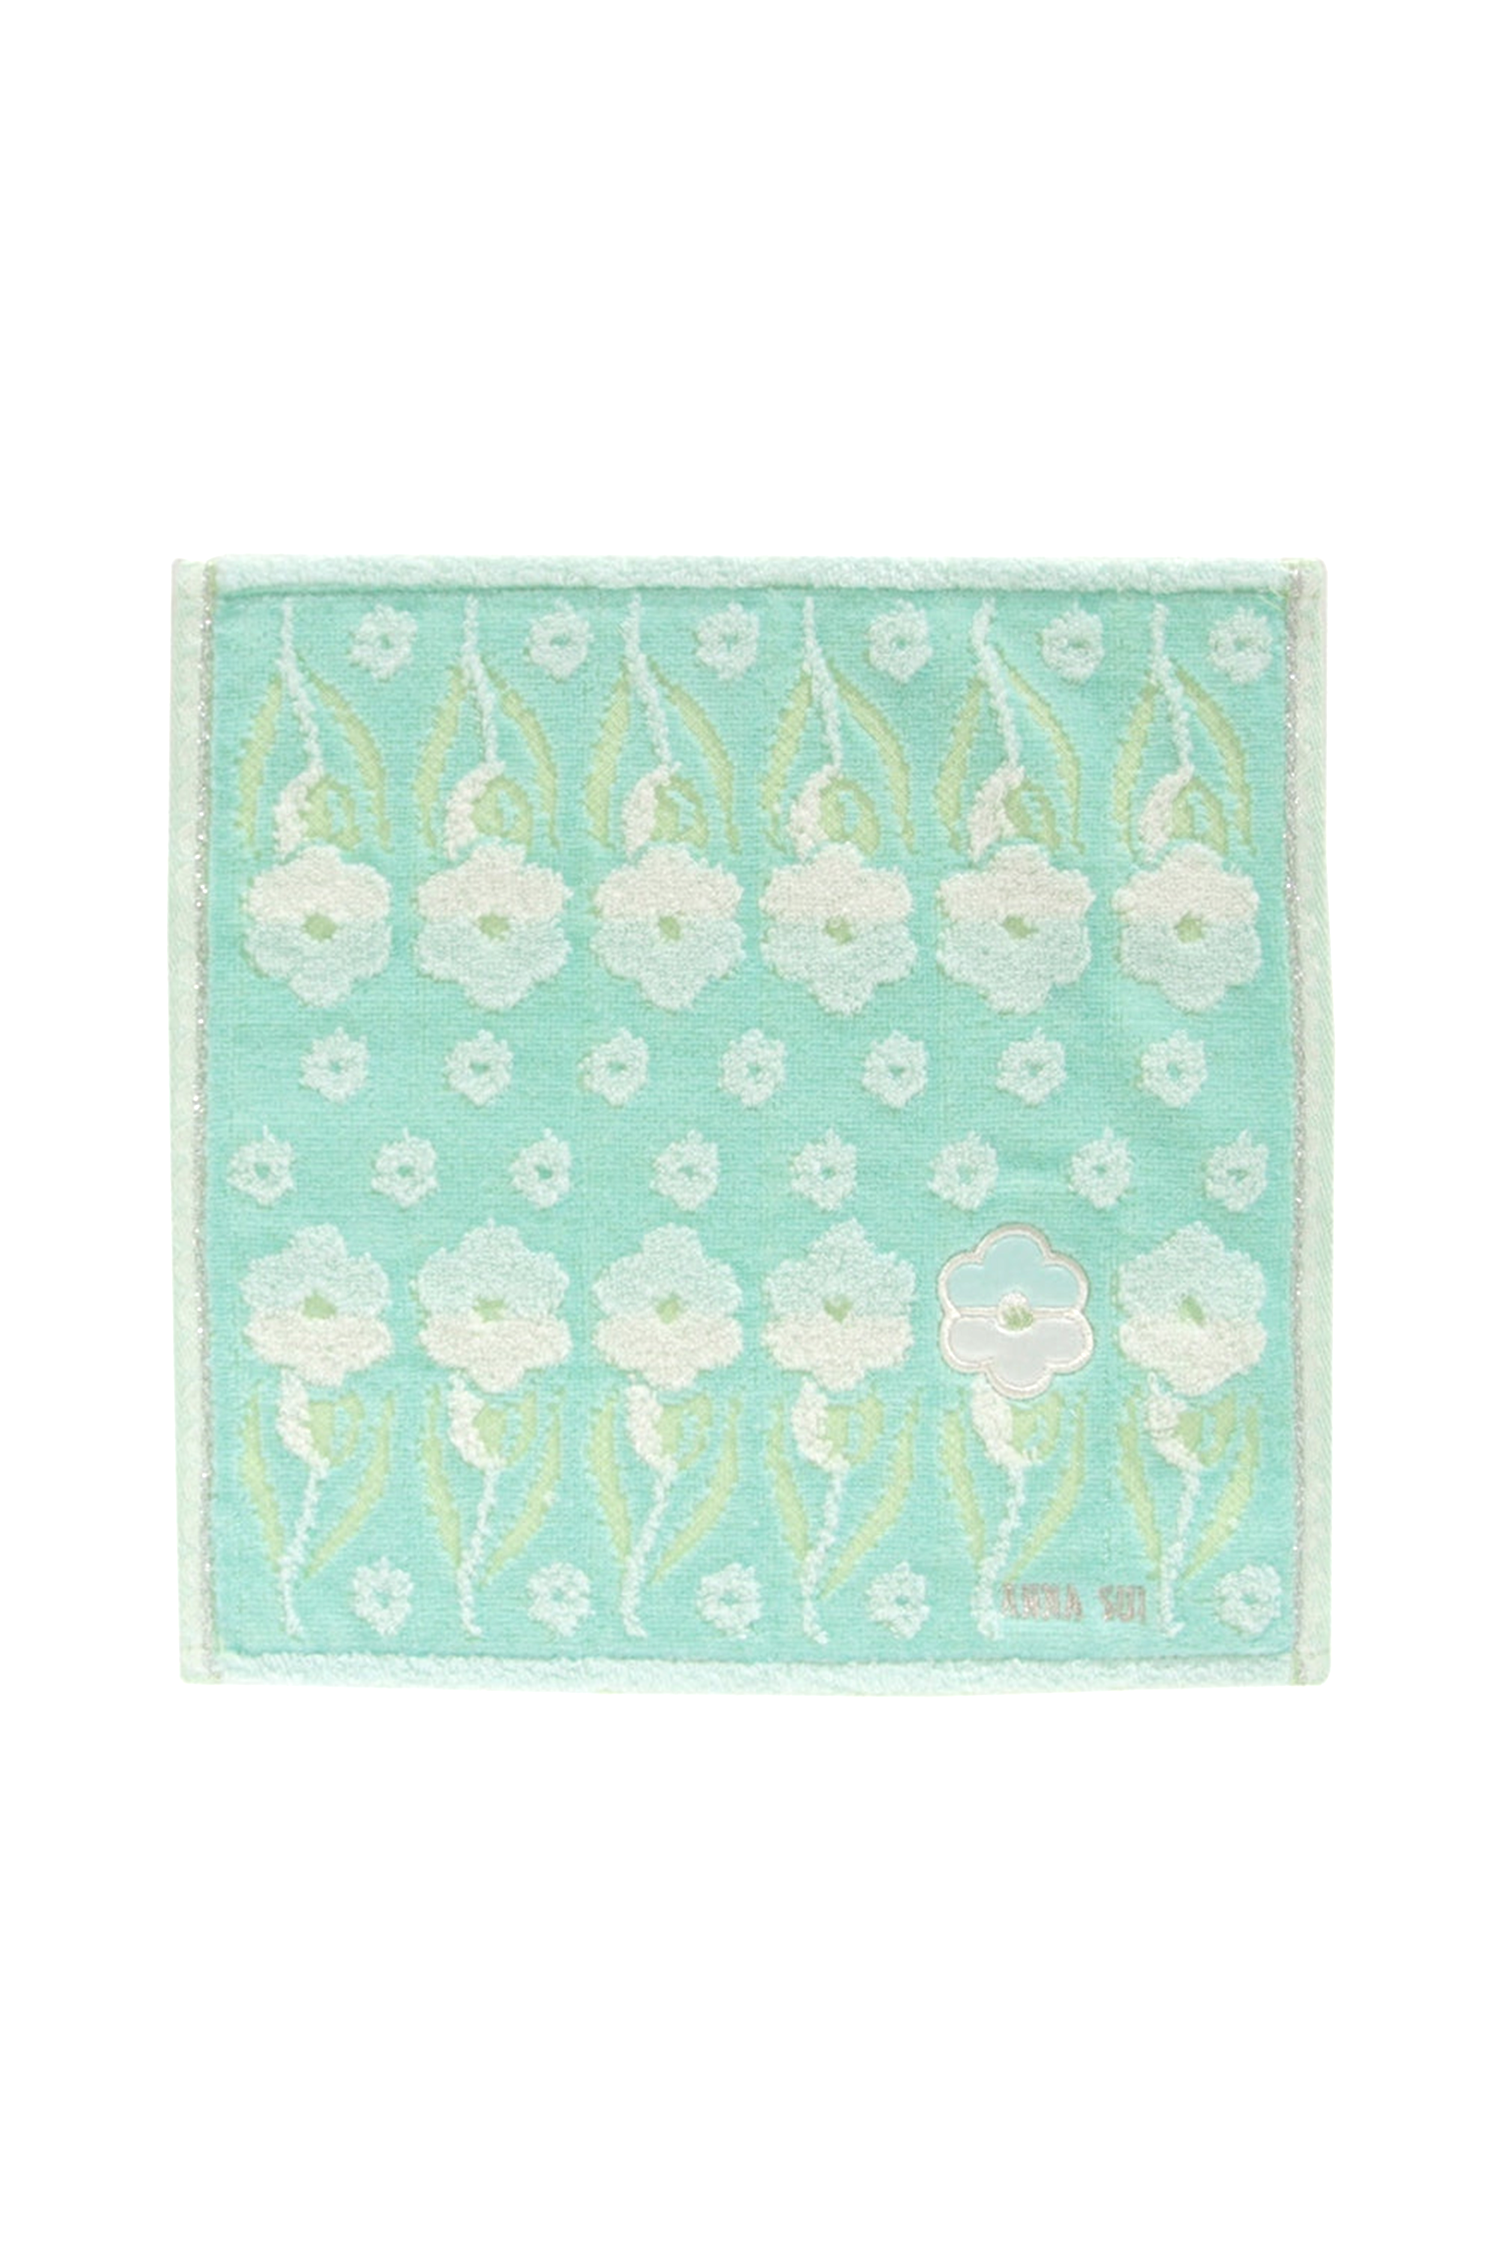 Pansy Panel Washcloth, green with 2lines of white/white Pansy, Anna Sui label at bottom 